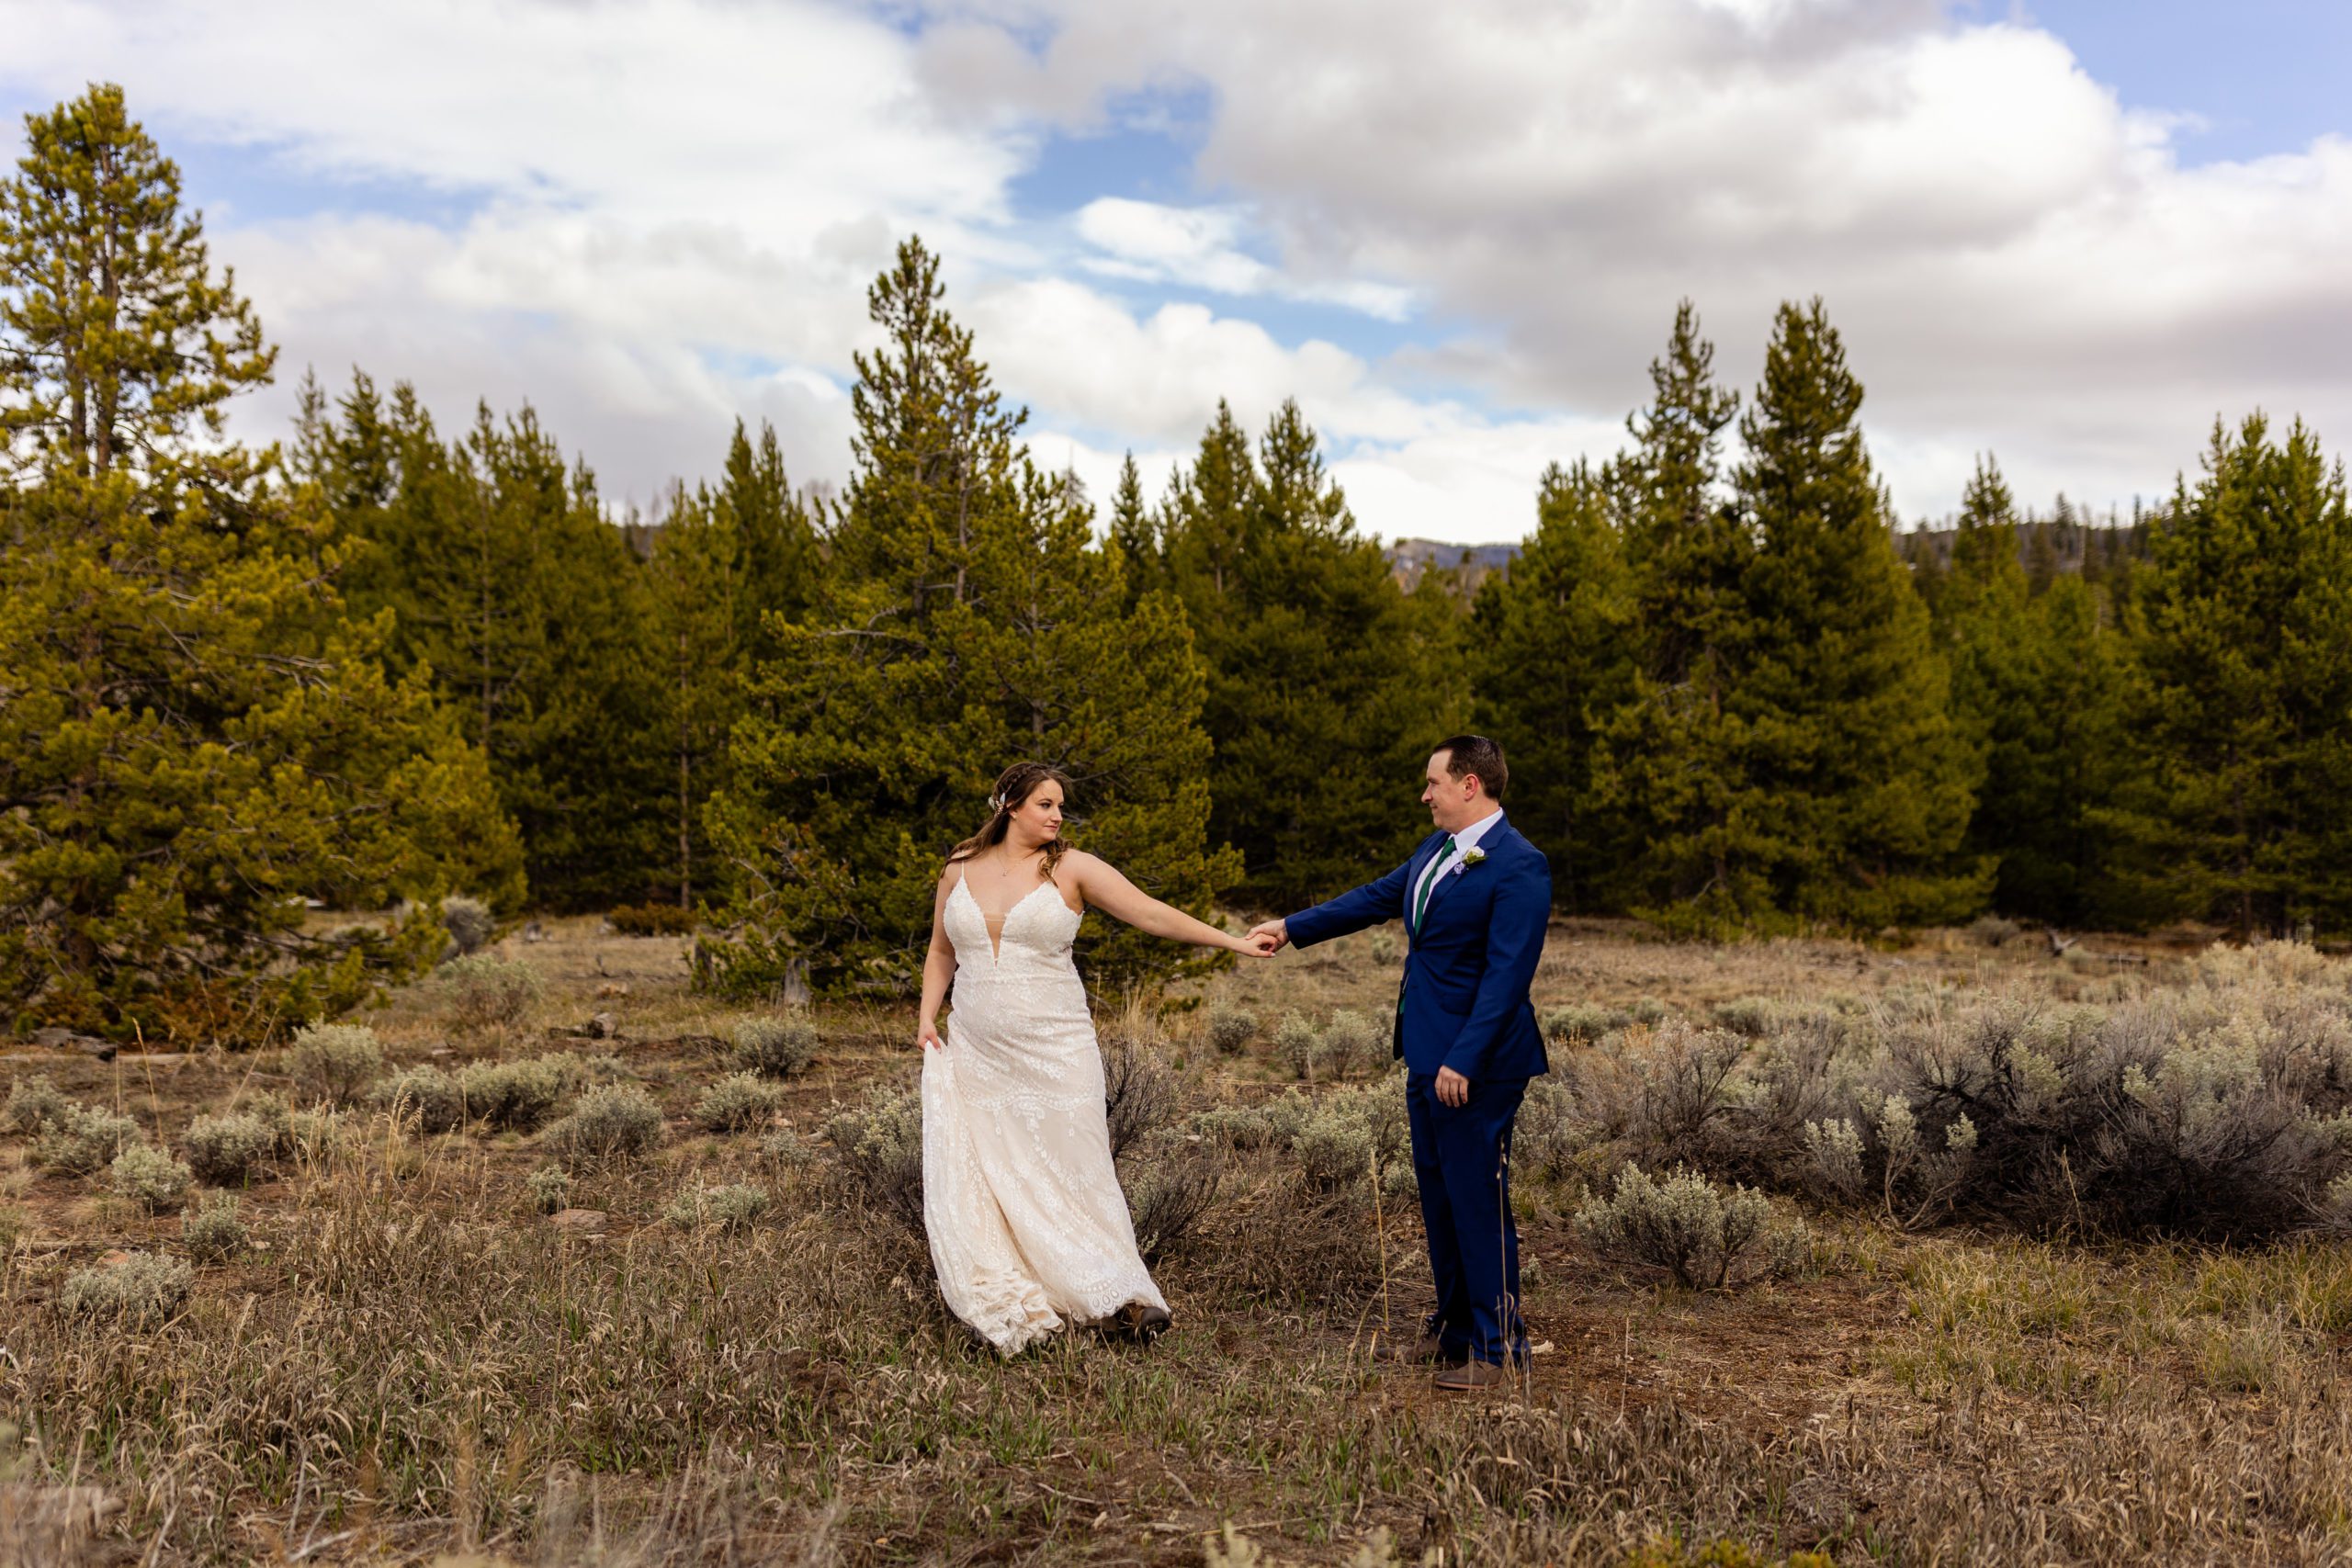 The bride and groom dances amongst the tress before their Sapphire Point Elopement.